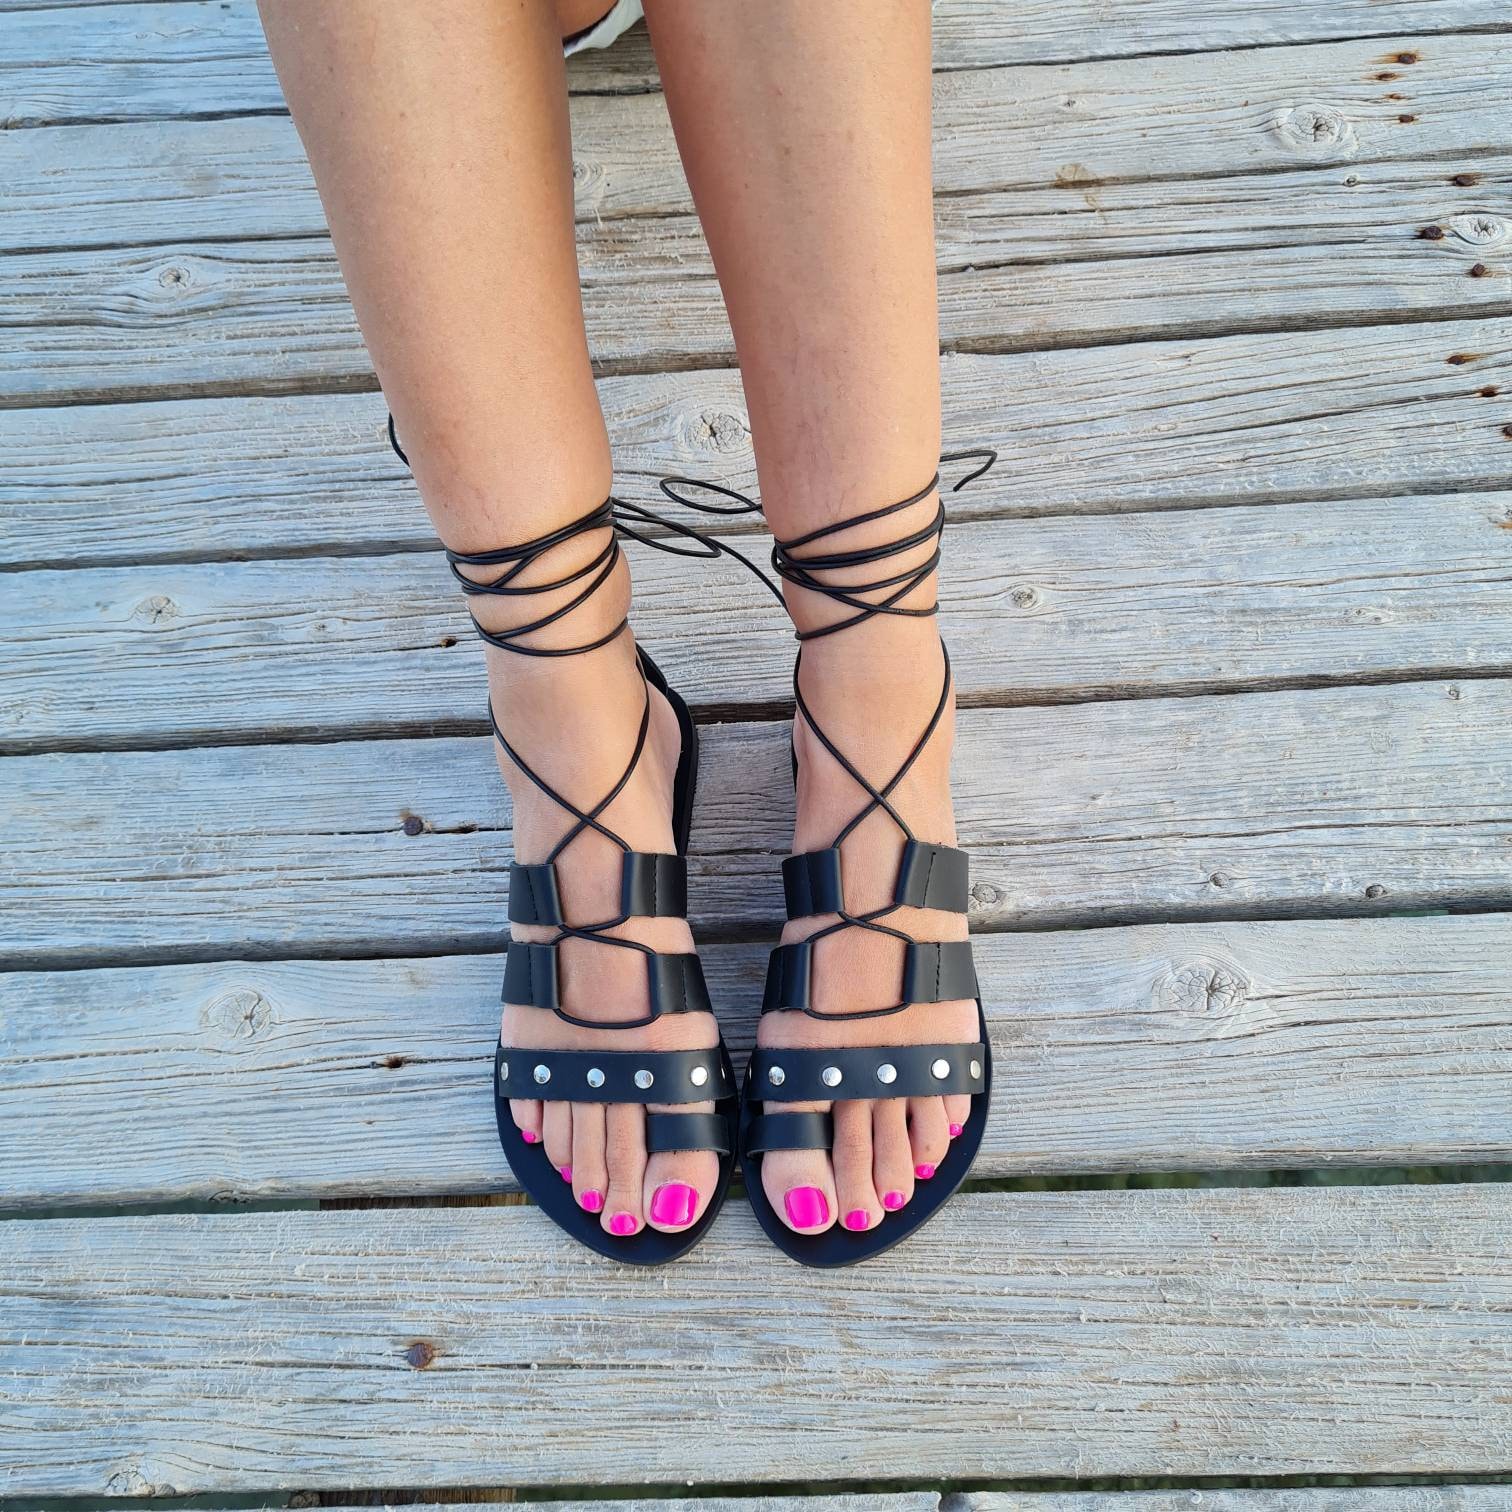 Lace up Studded Sandals for Women Black Tie up Summer - Etsy UK